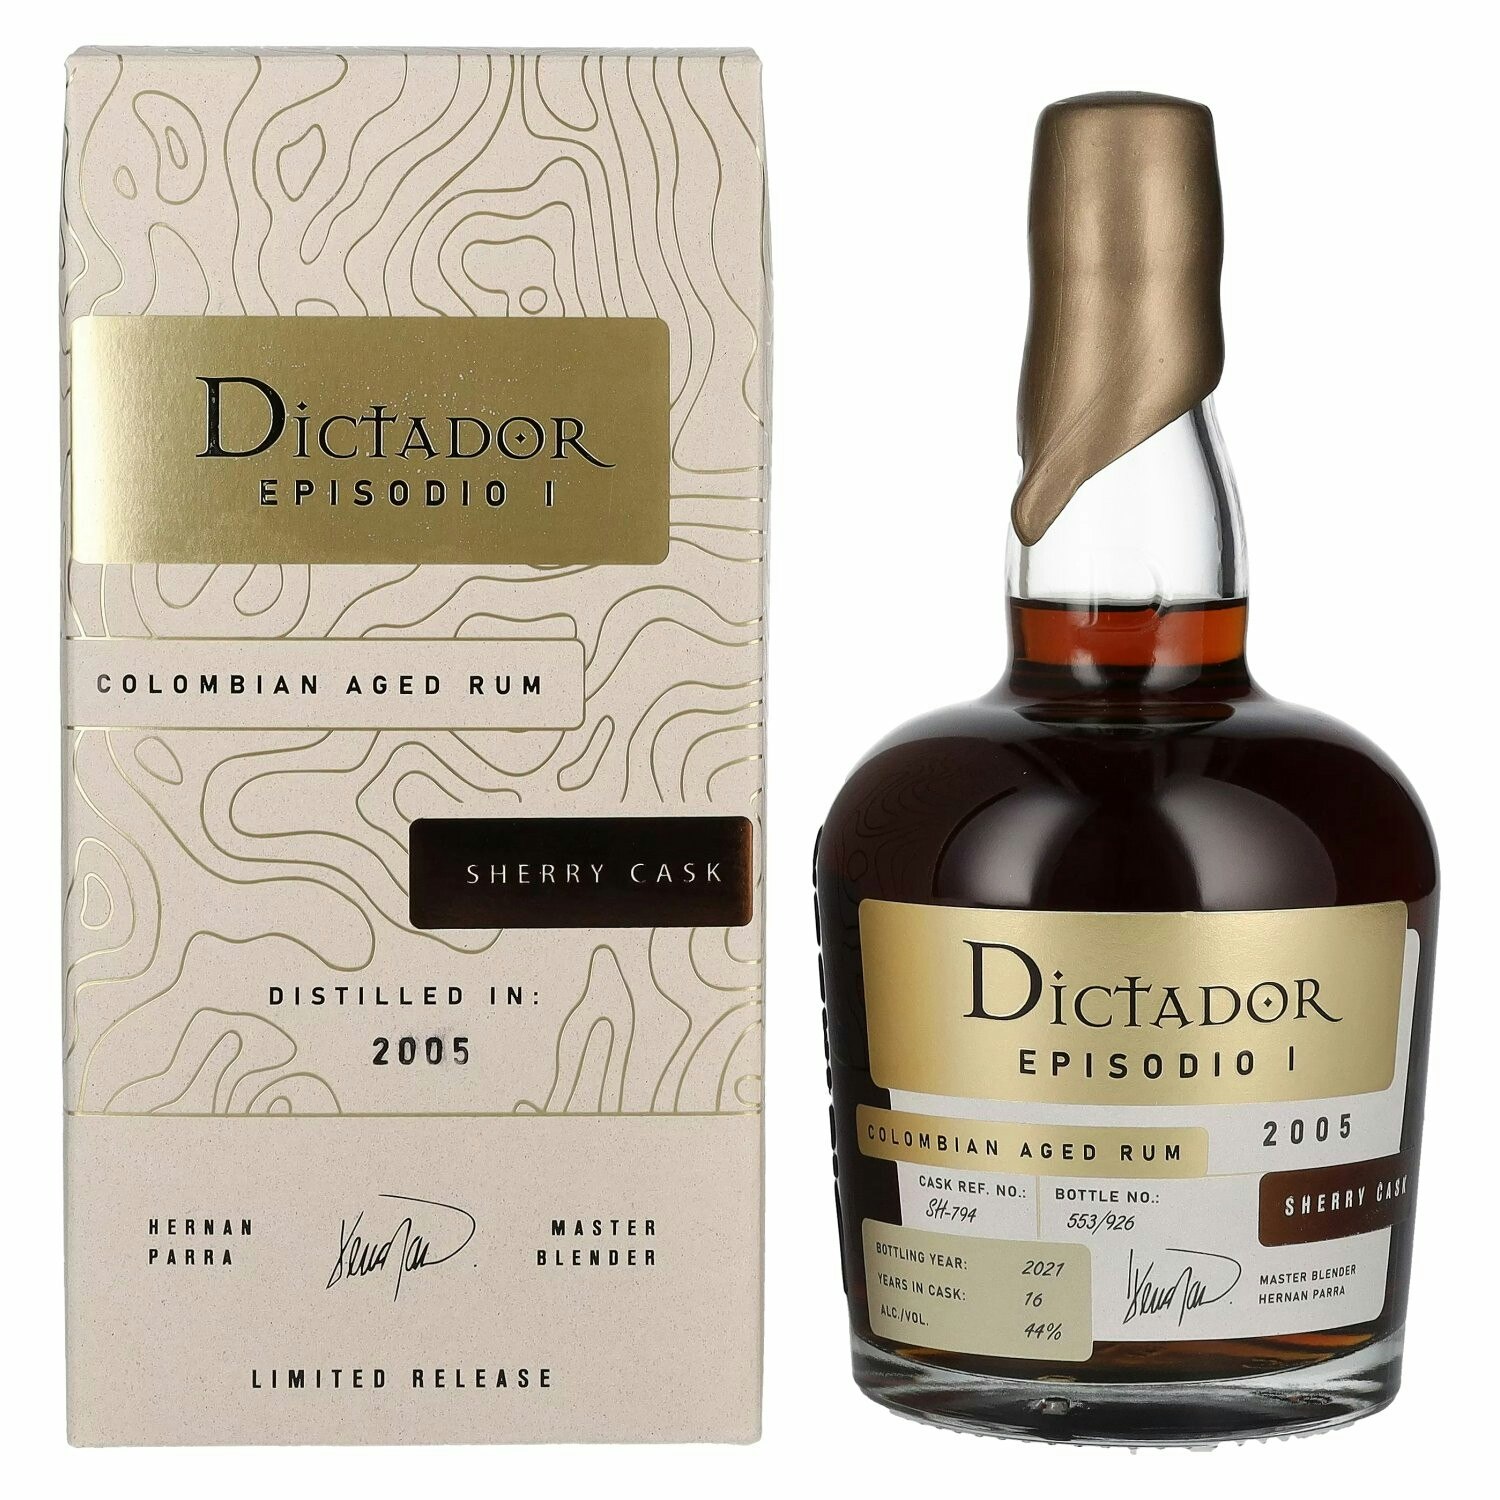 Dictador EPISODIO I 16 Years Old SHERRY CASK Rum 2005 44% Vol. 0,7l in Giftbox